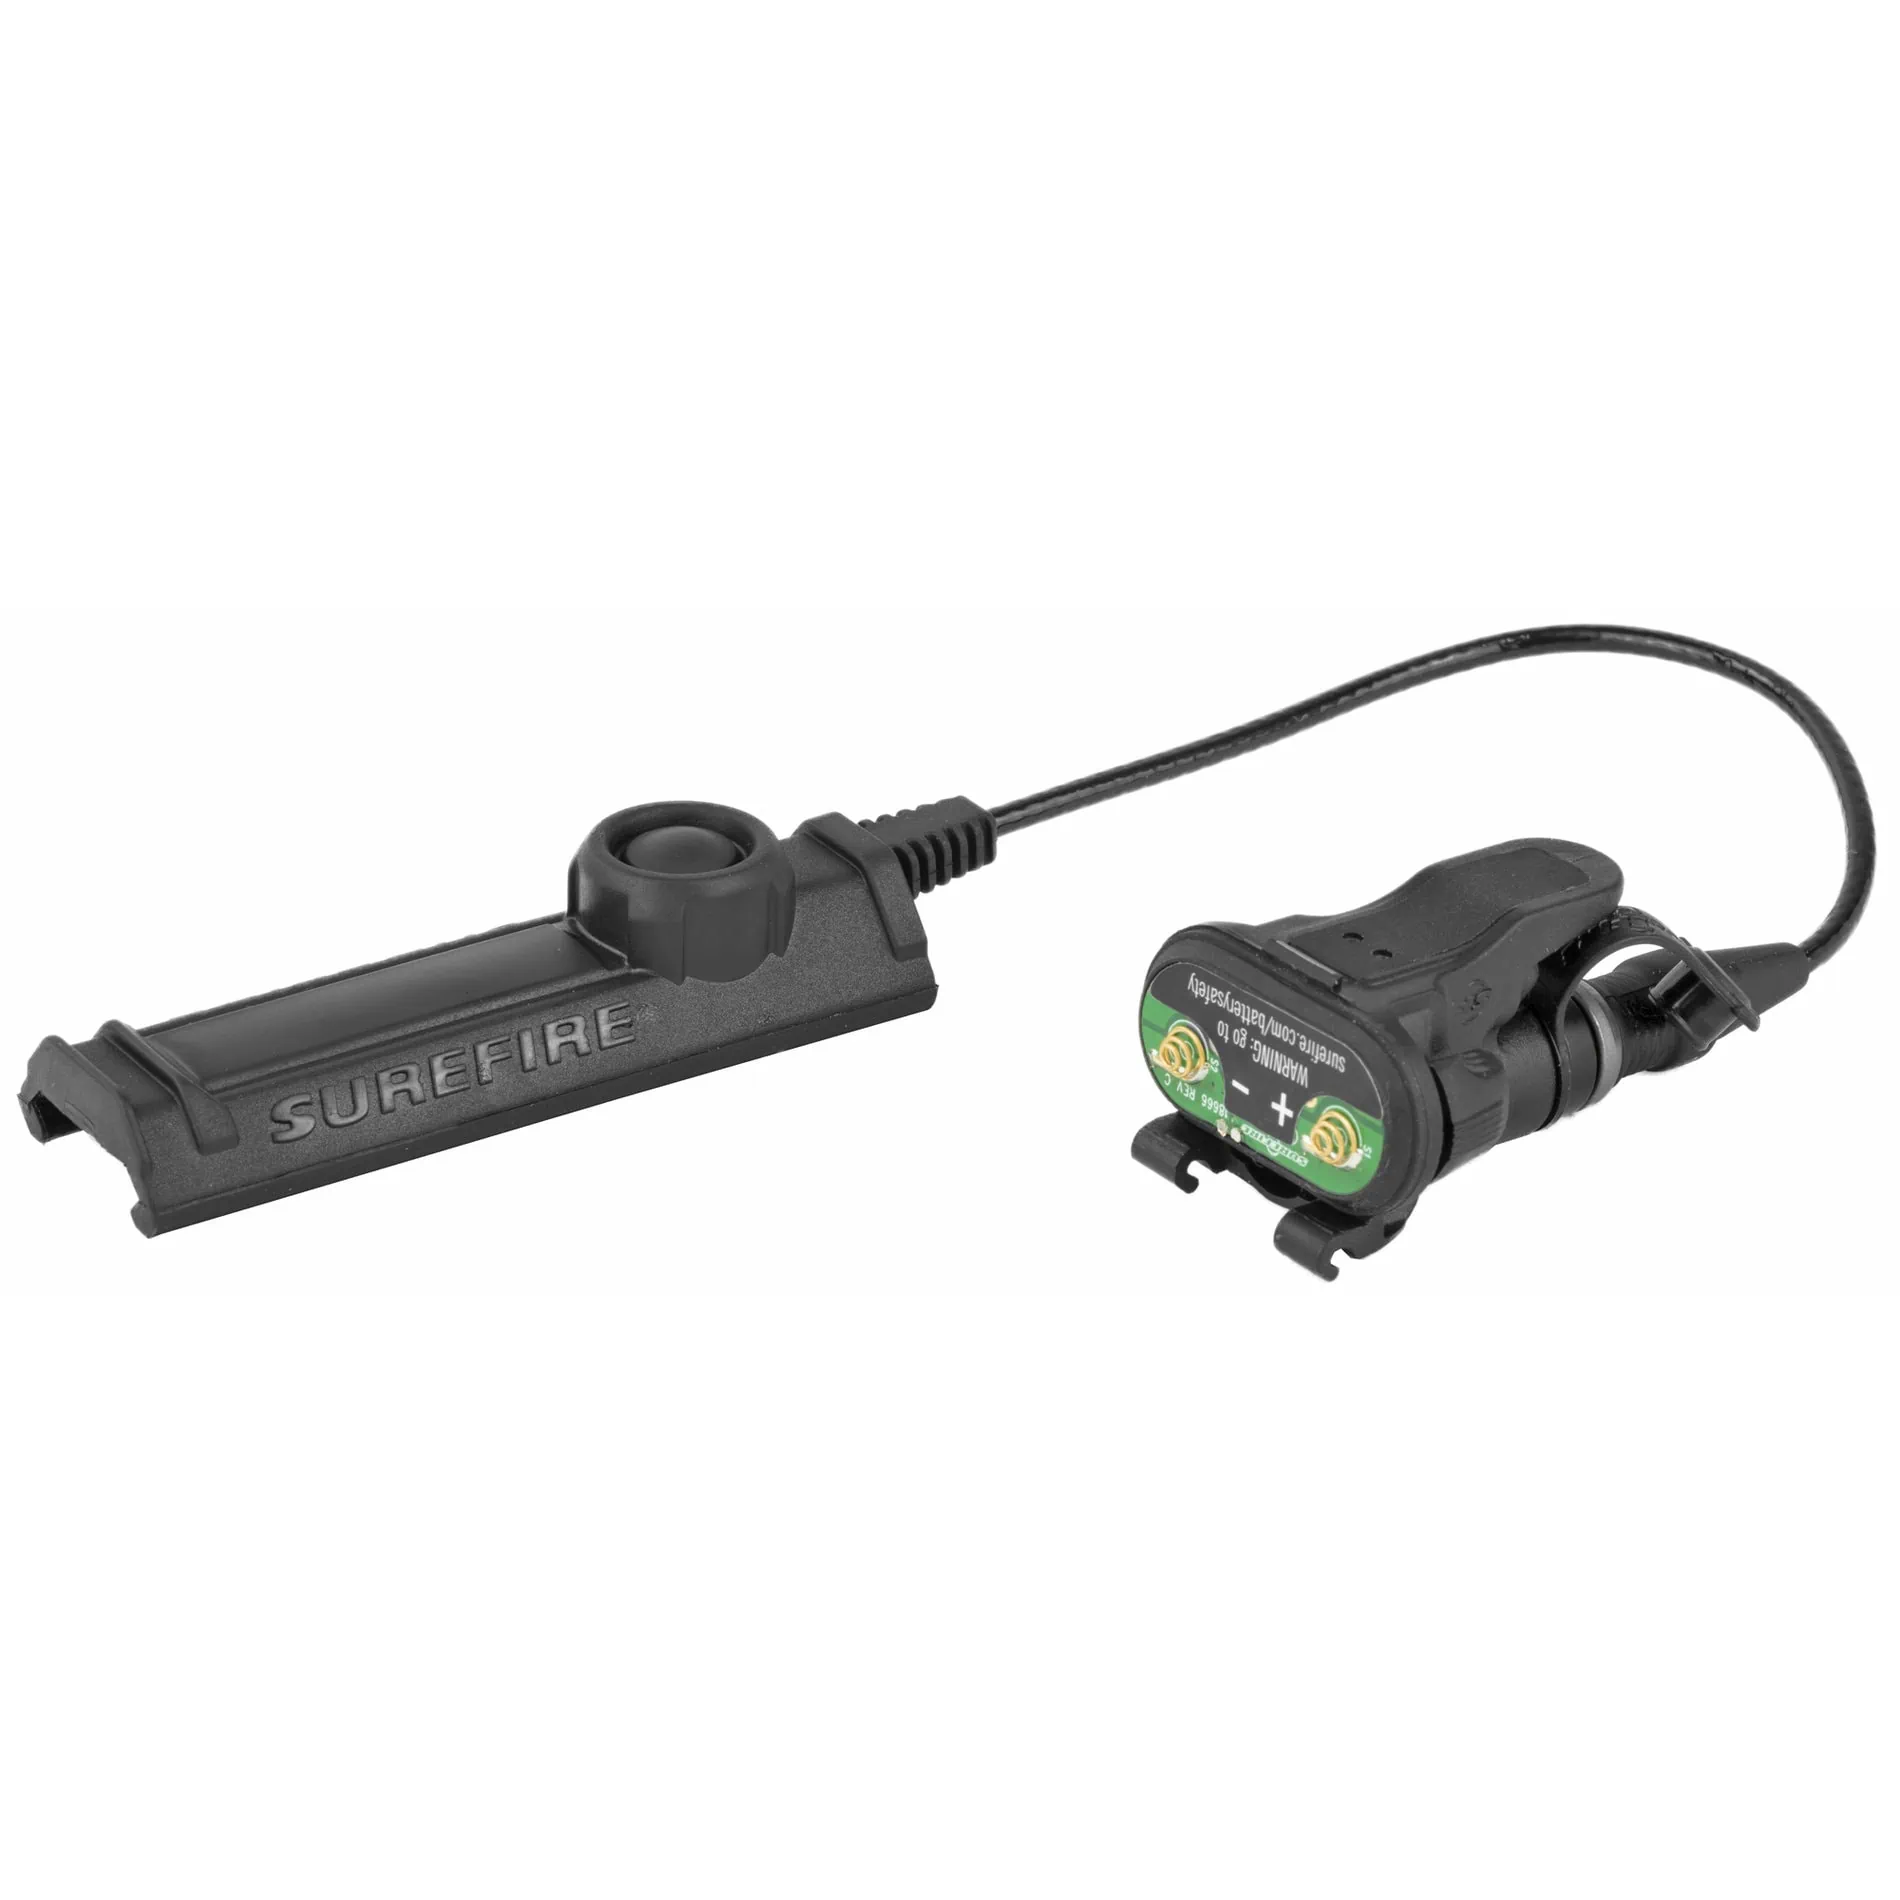 Surefire XT07 Remote Dual Switch for X300 Weapon Lights - AT3 Tactical